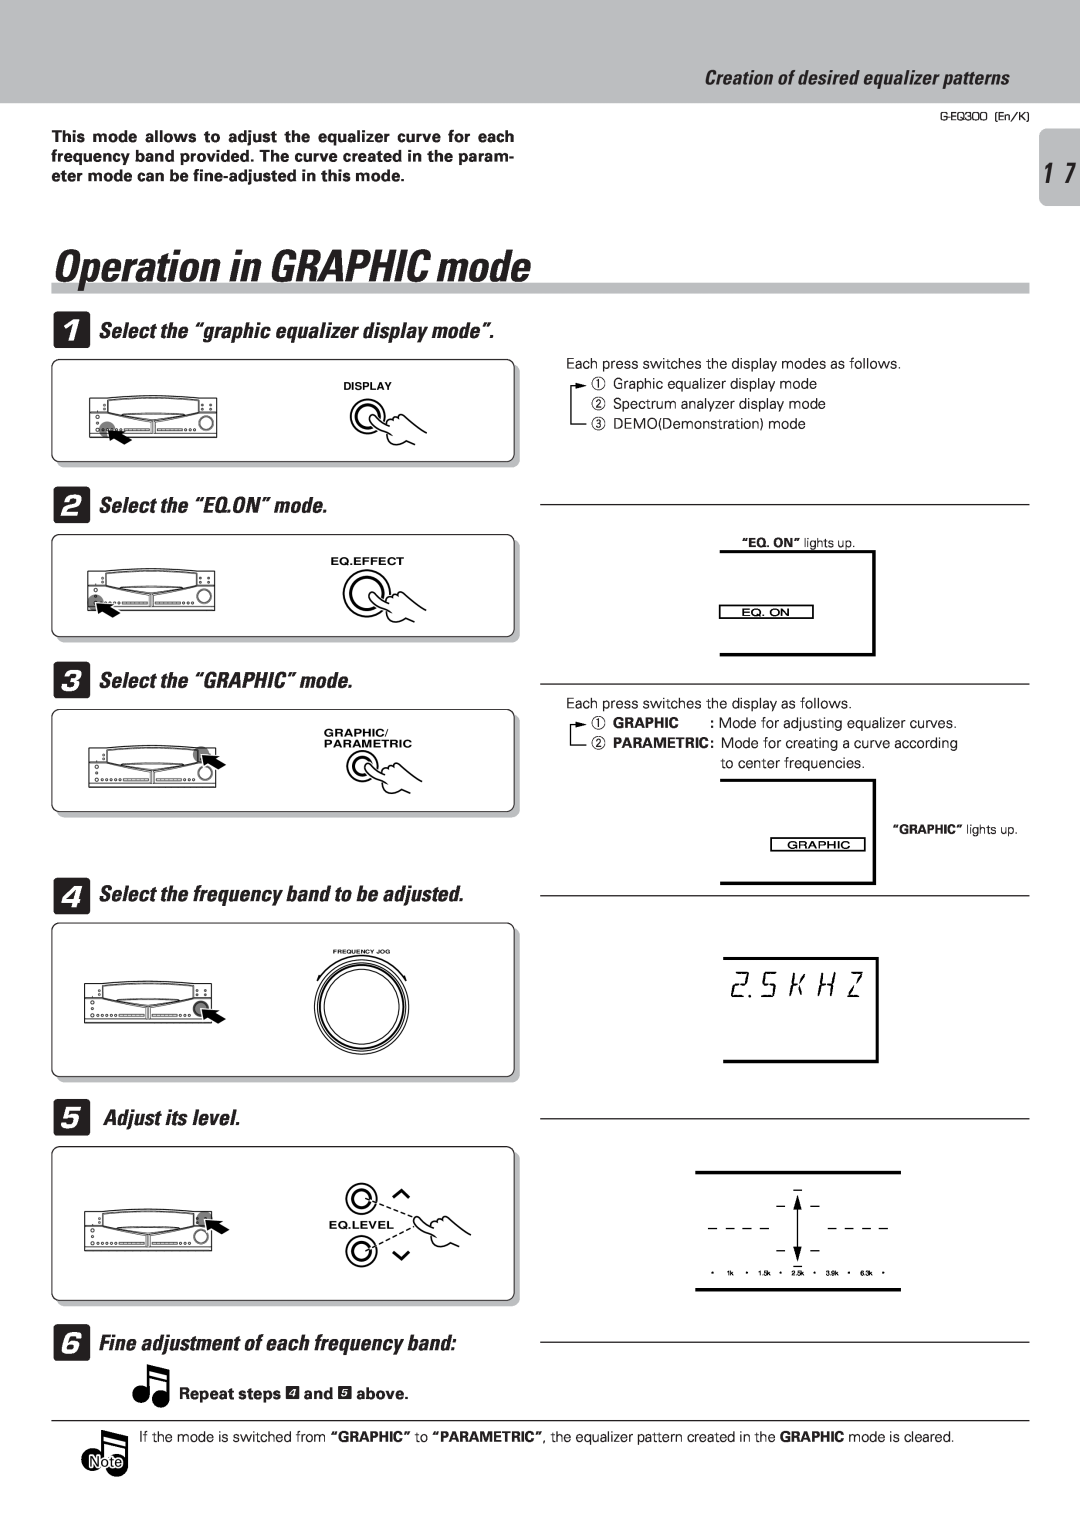 Kenwood G-EQ300 Operation in GRAPHIC mode, 2 5 K H Z, Select the “GRAPHIC” mode, Select the frequency band to be adjusted 